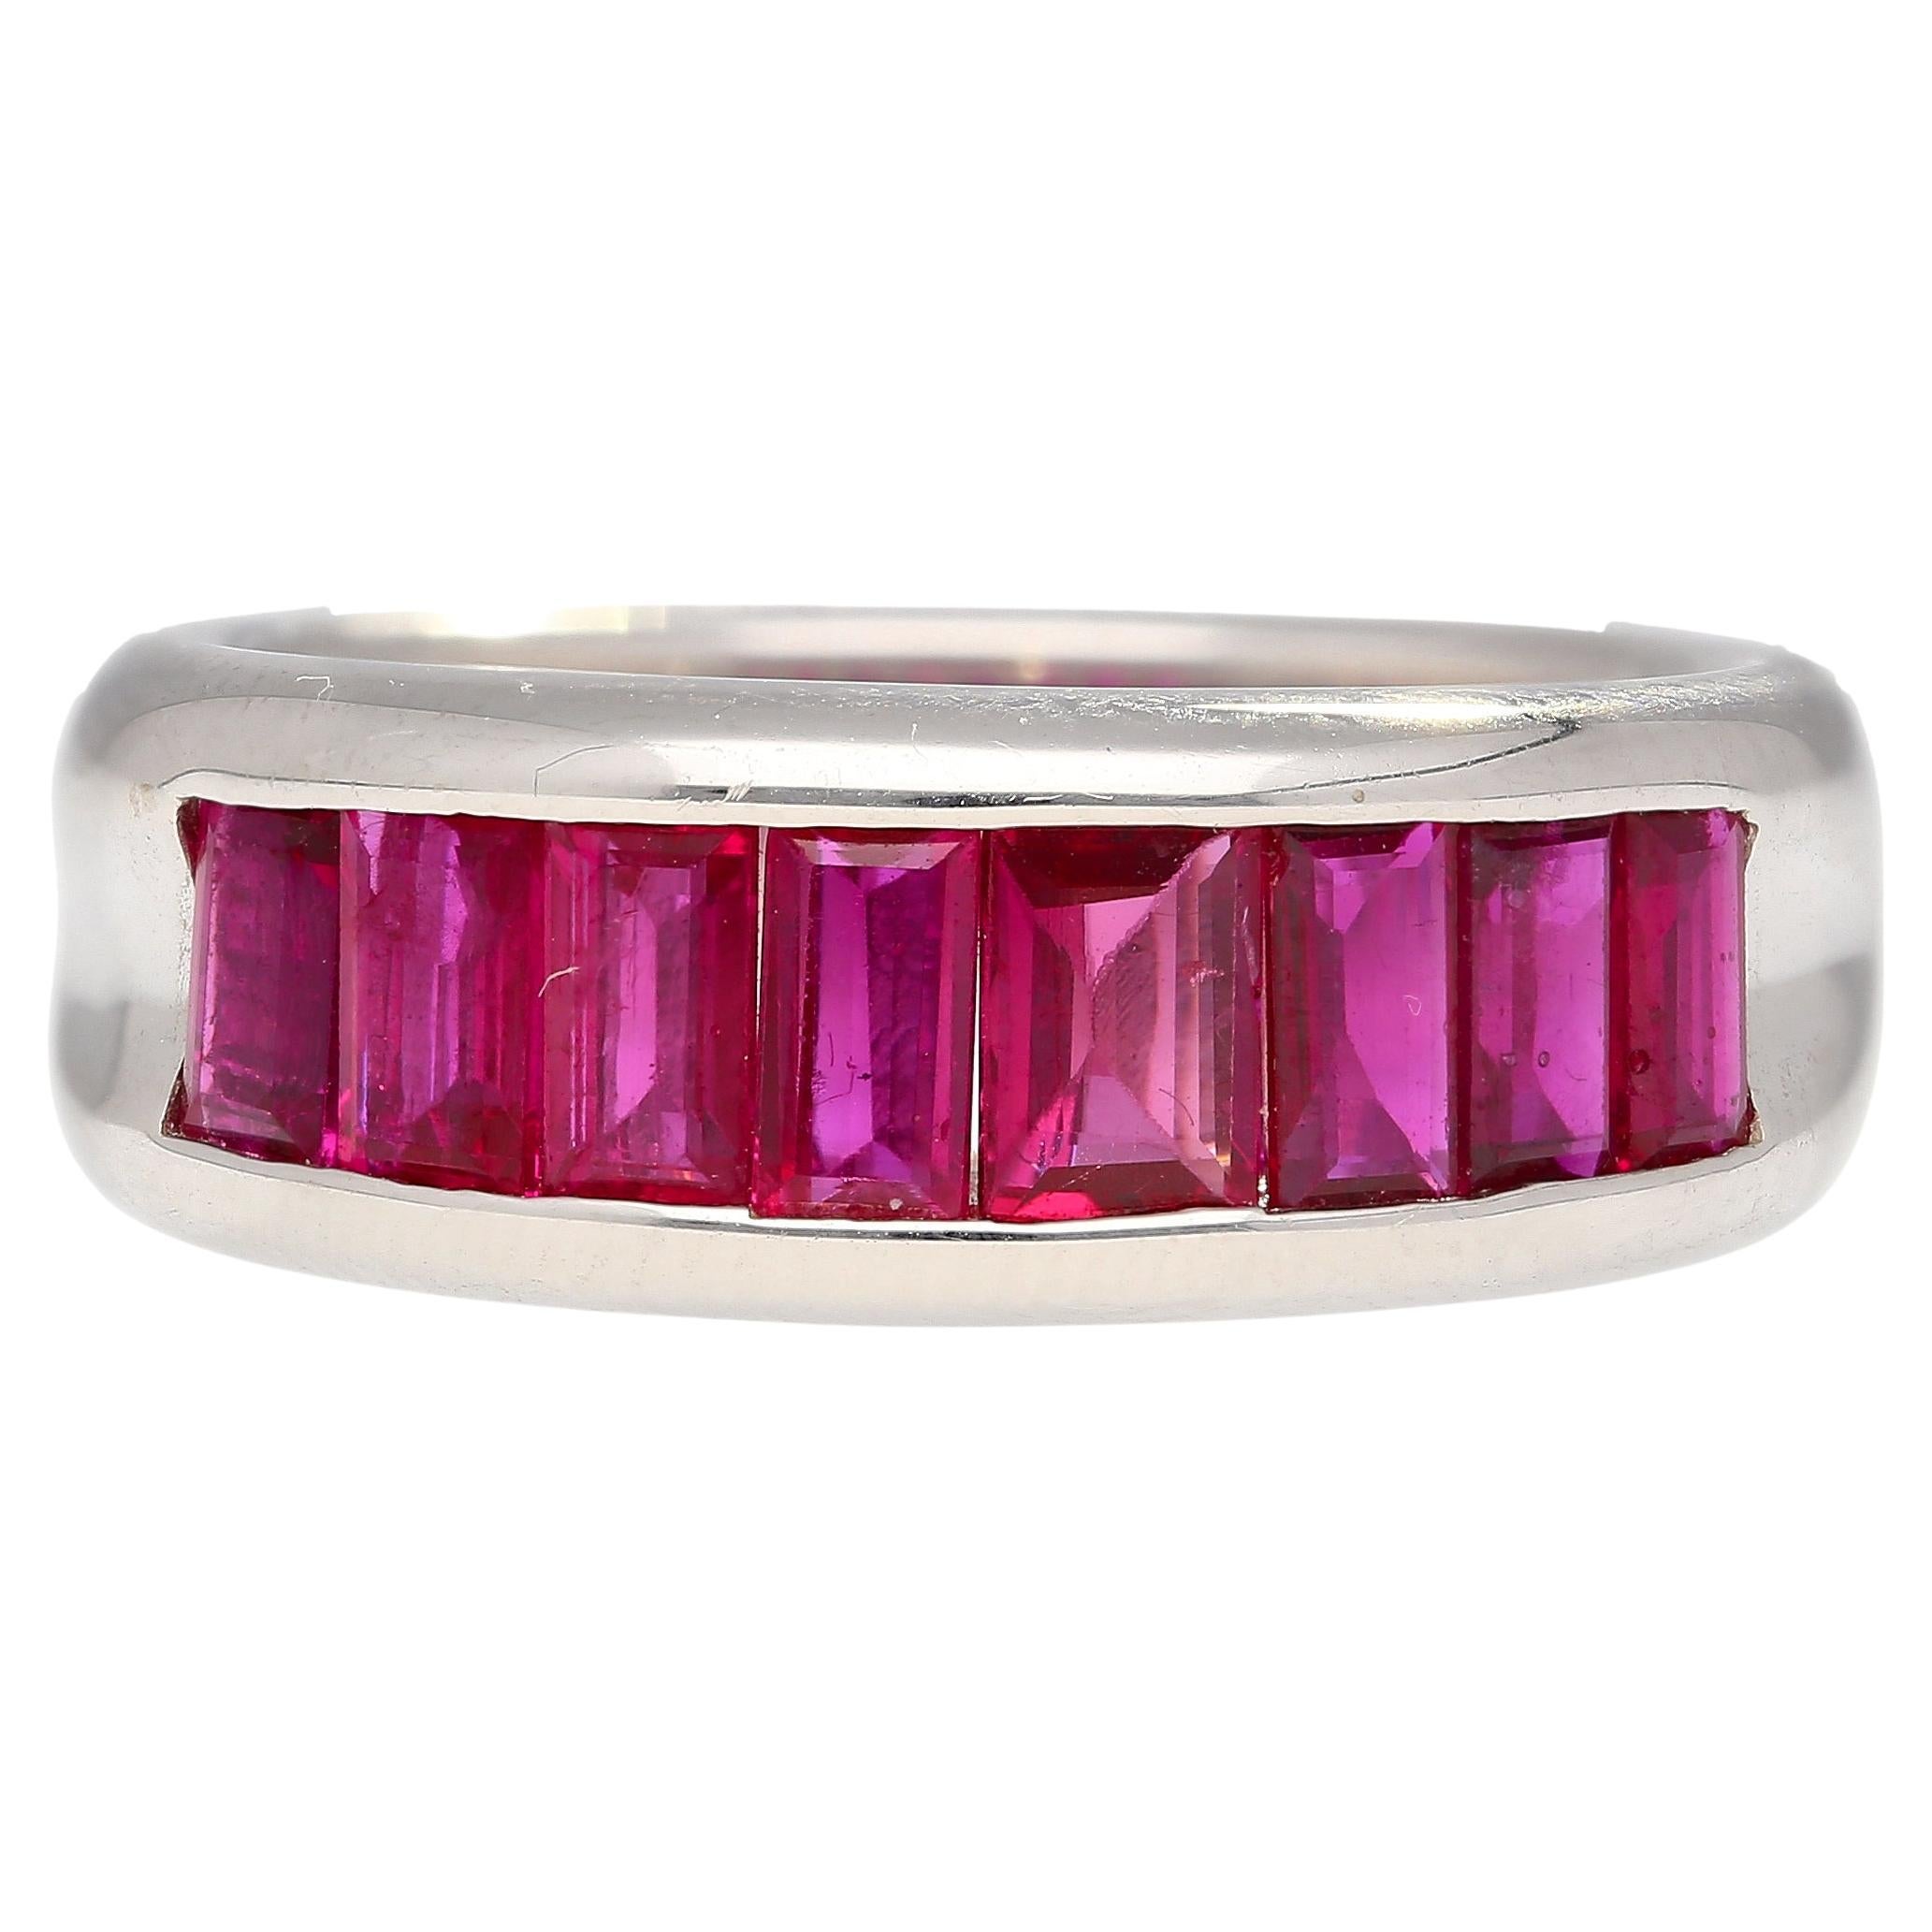 18K White Gold Channel Set Natural Baguette Cut One-Row Ruby Band Ring